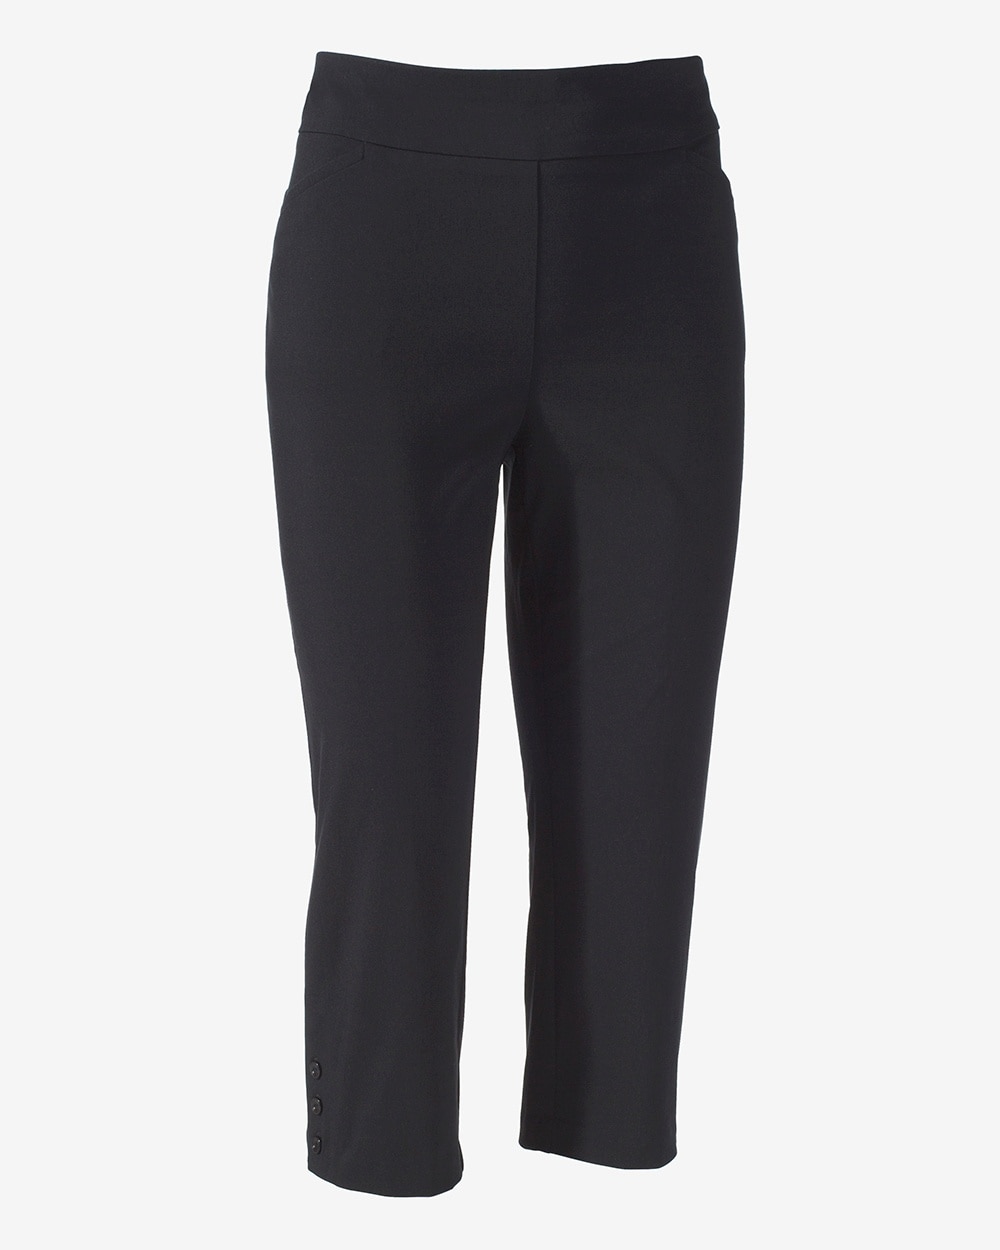 Perfect Stretch Josie Slim Capris - Chico's Off The Rack - Chico's Outlet